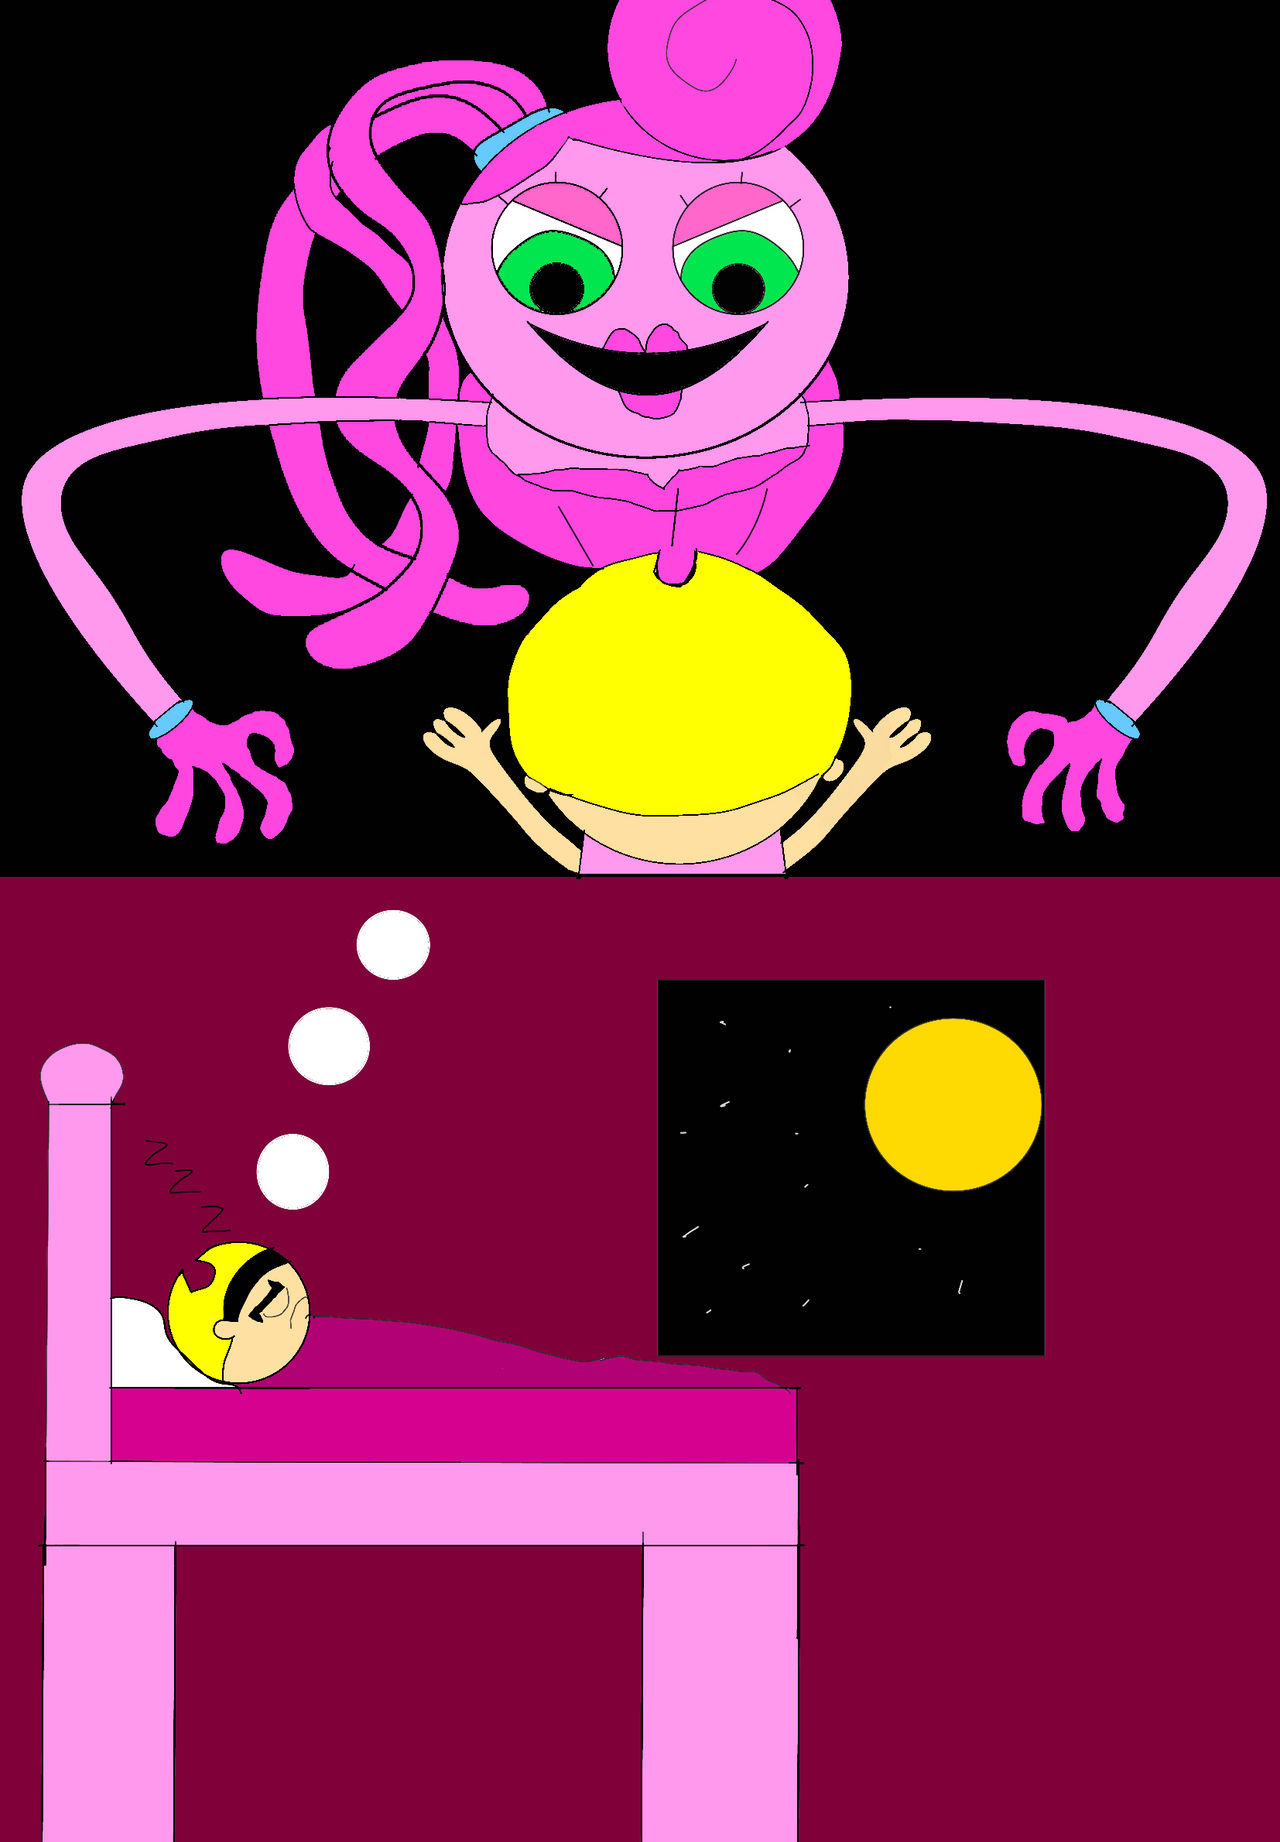 Mandy Encounters F From Alphabet Lore by DocterConnor on DeviantArt